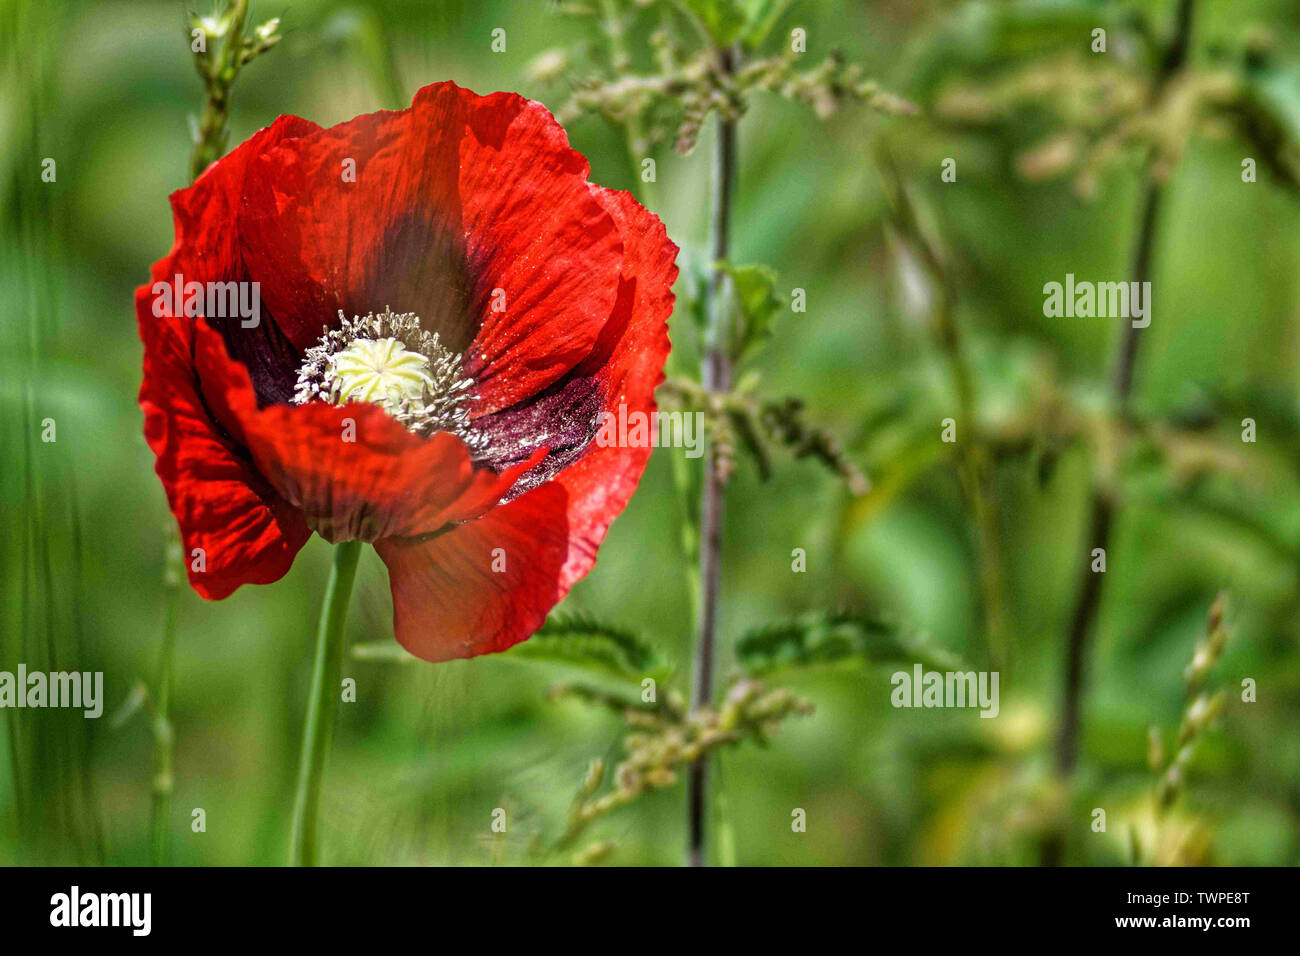 Red poppy growing in rural position Stock Photo